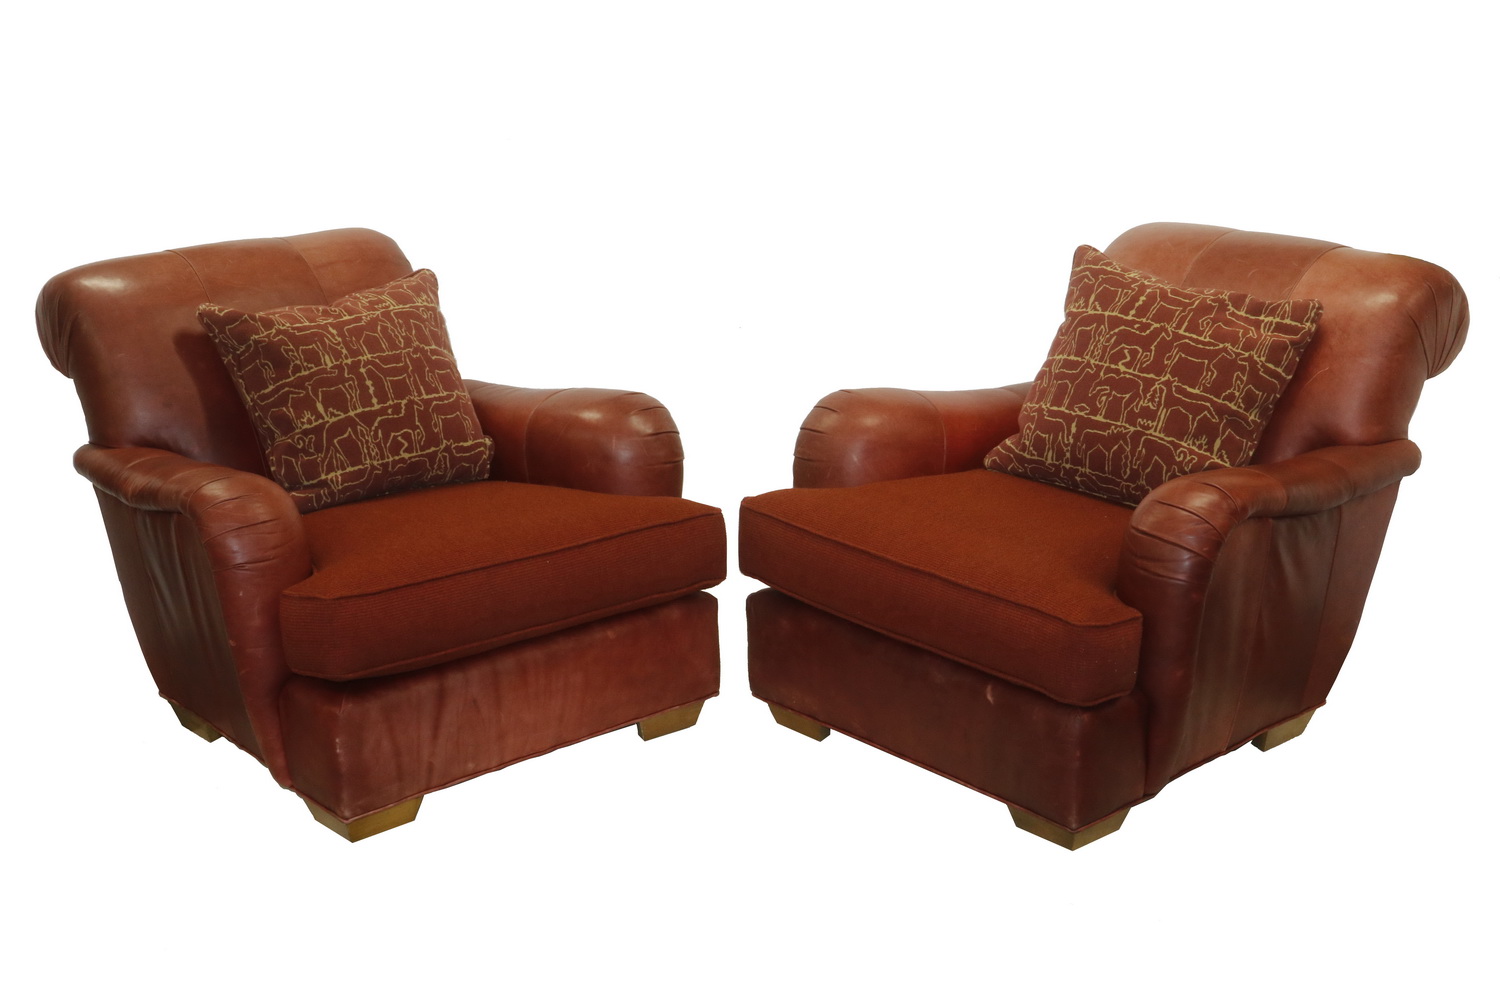 PR BAKER RED LEATHER CLUB CHAIRS